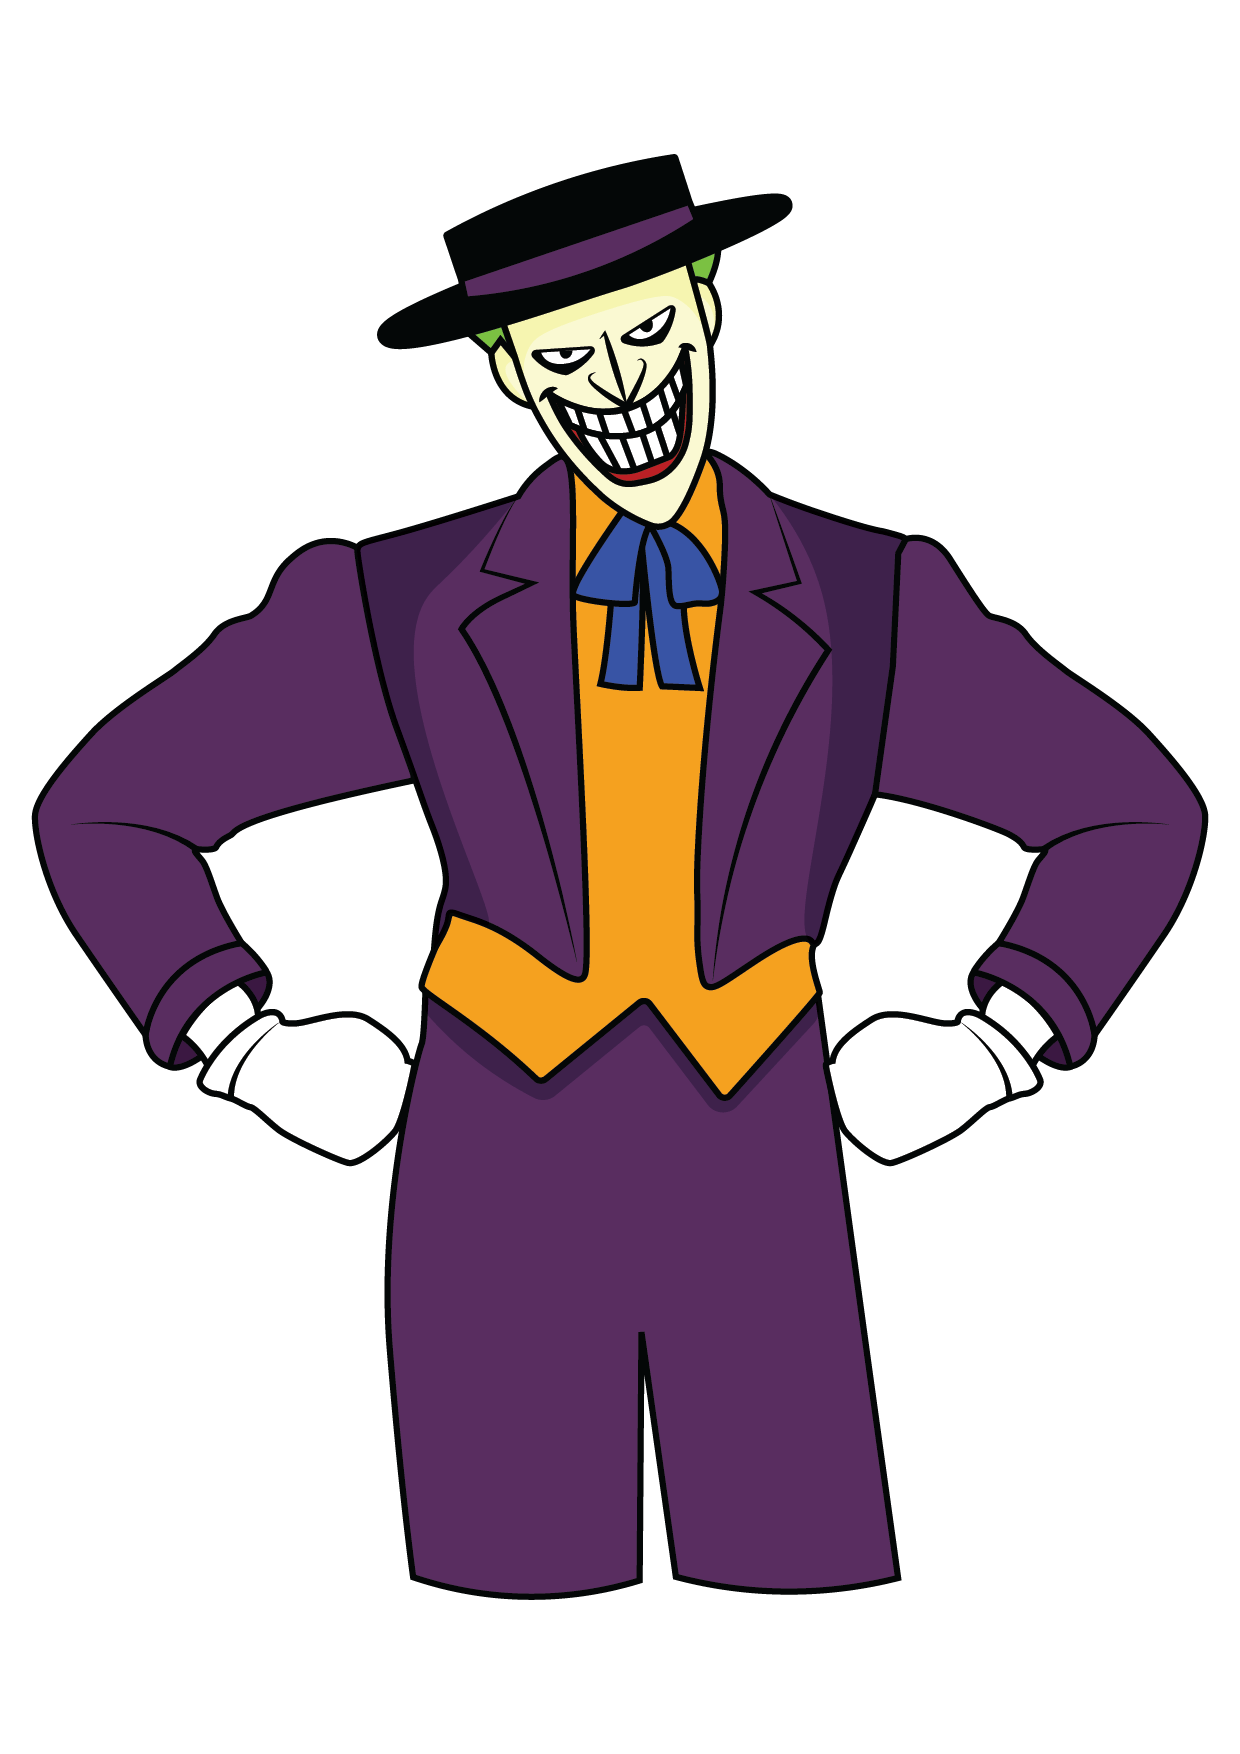 How to Draw The Joker Cartoon Step by Step Printable